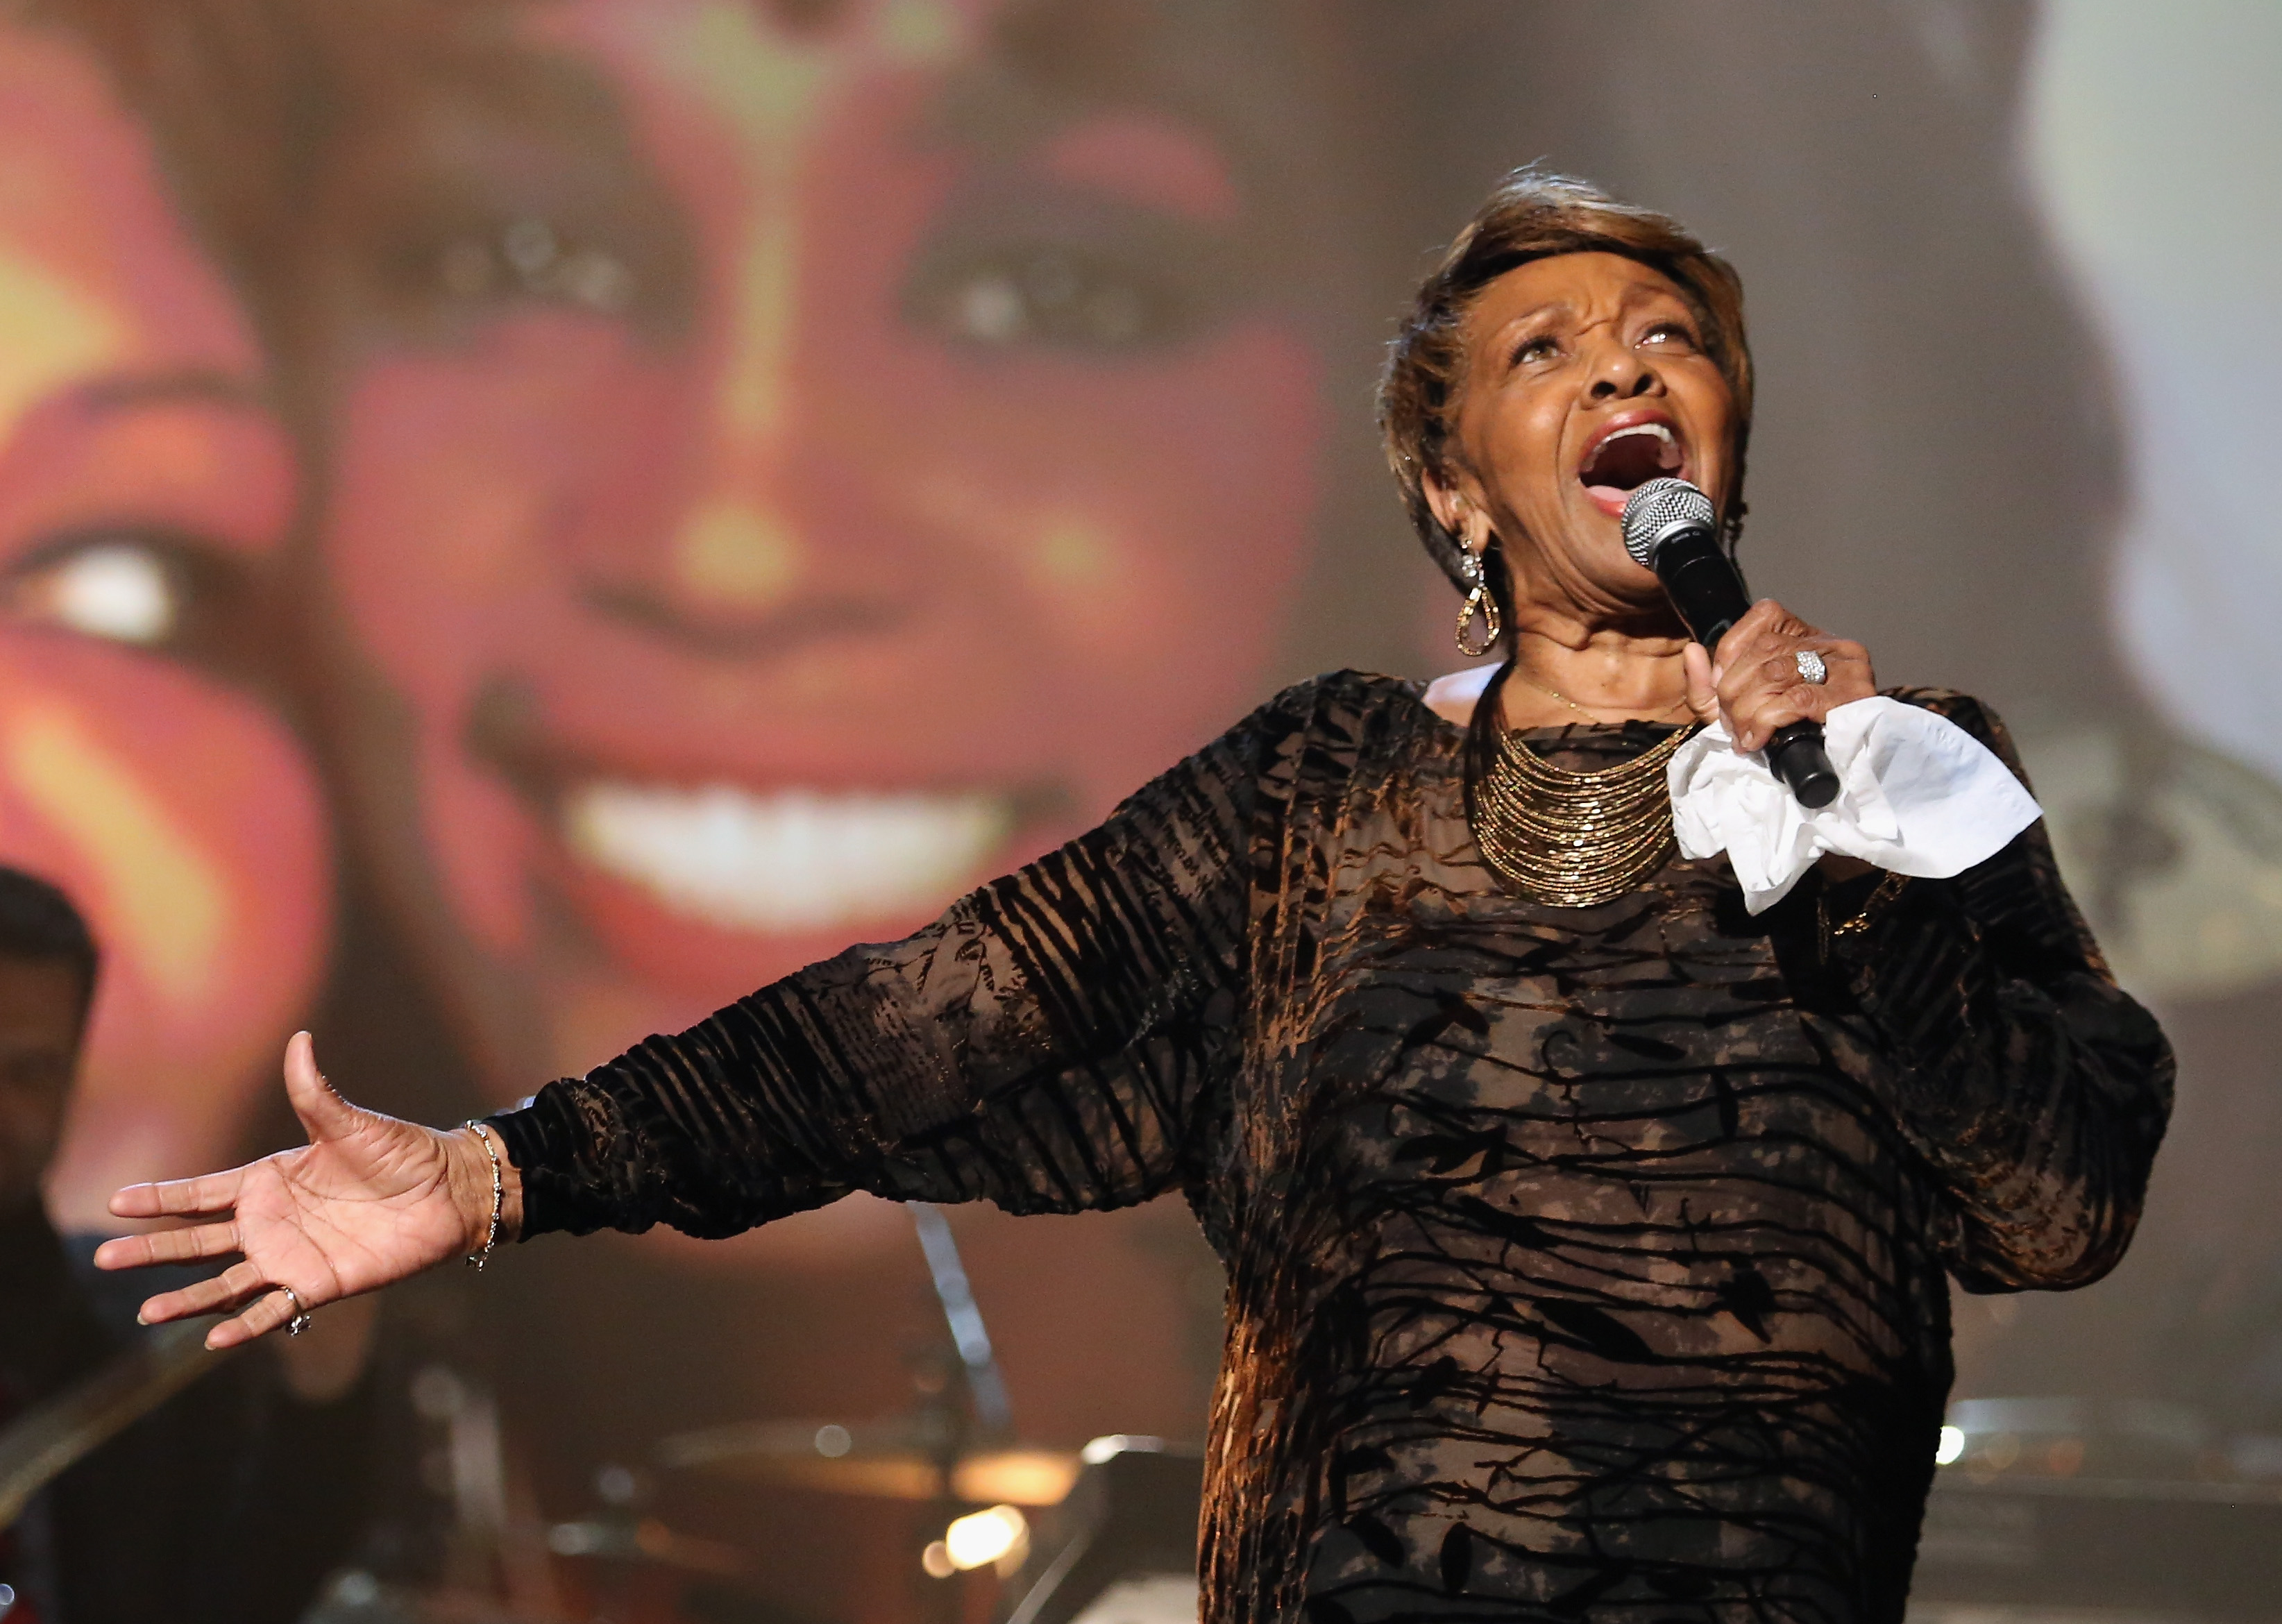 Cissy Houston performing at the BET Awards in Los Angeles in 2012 | Source: Getty Images